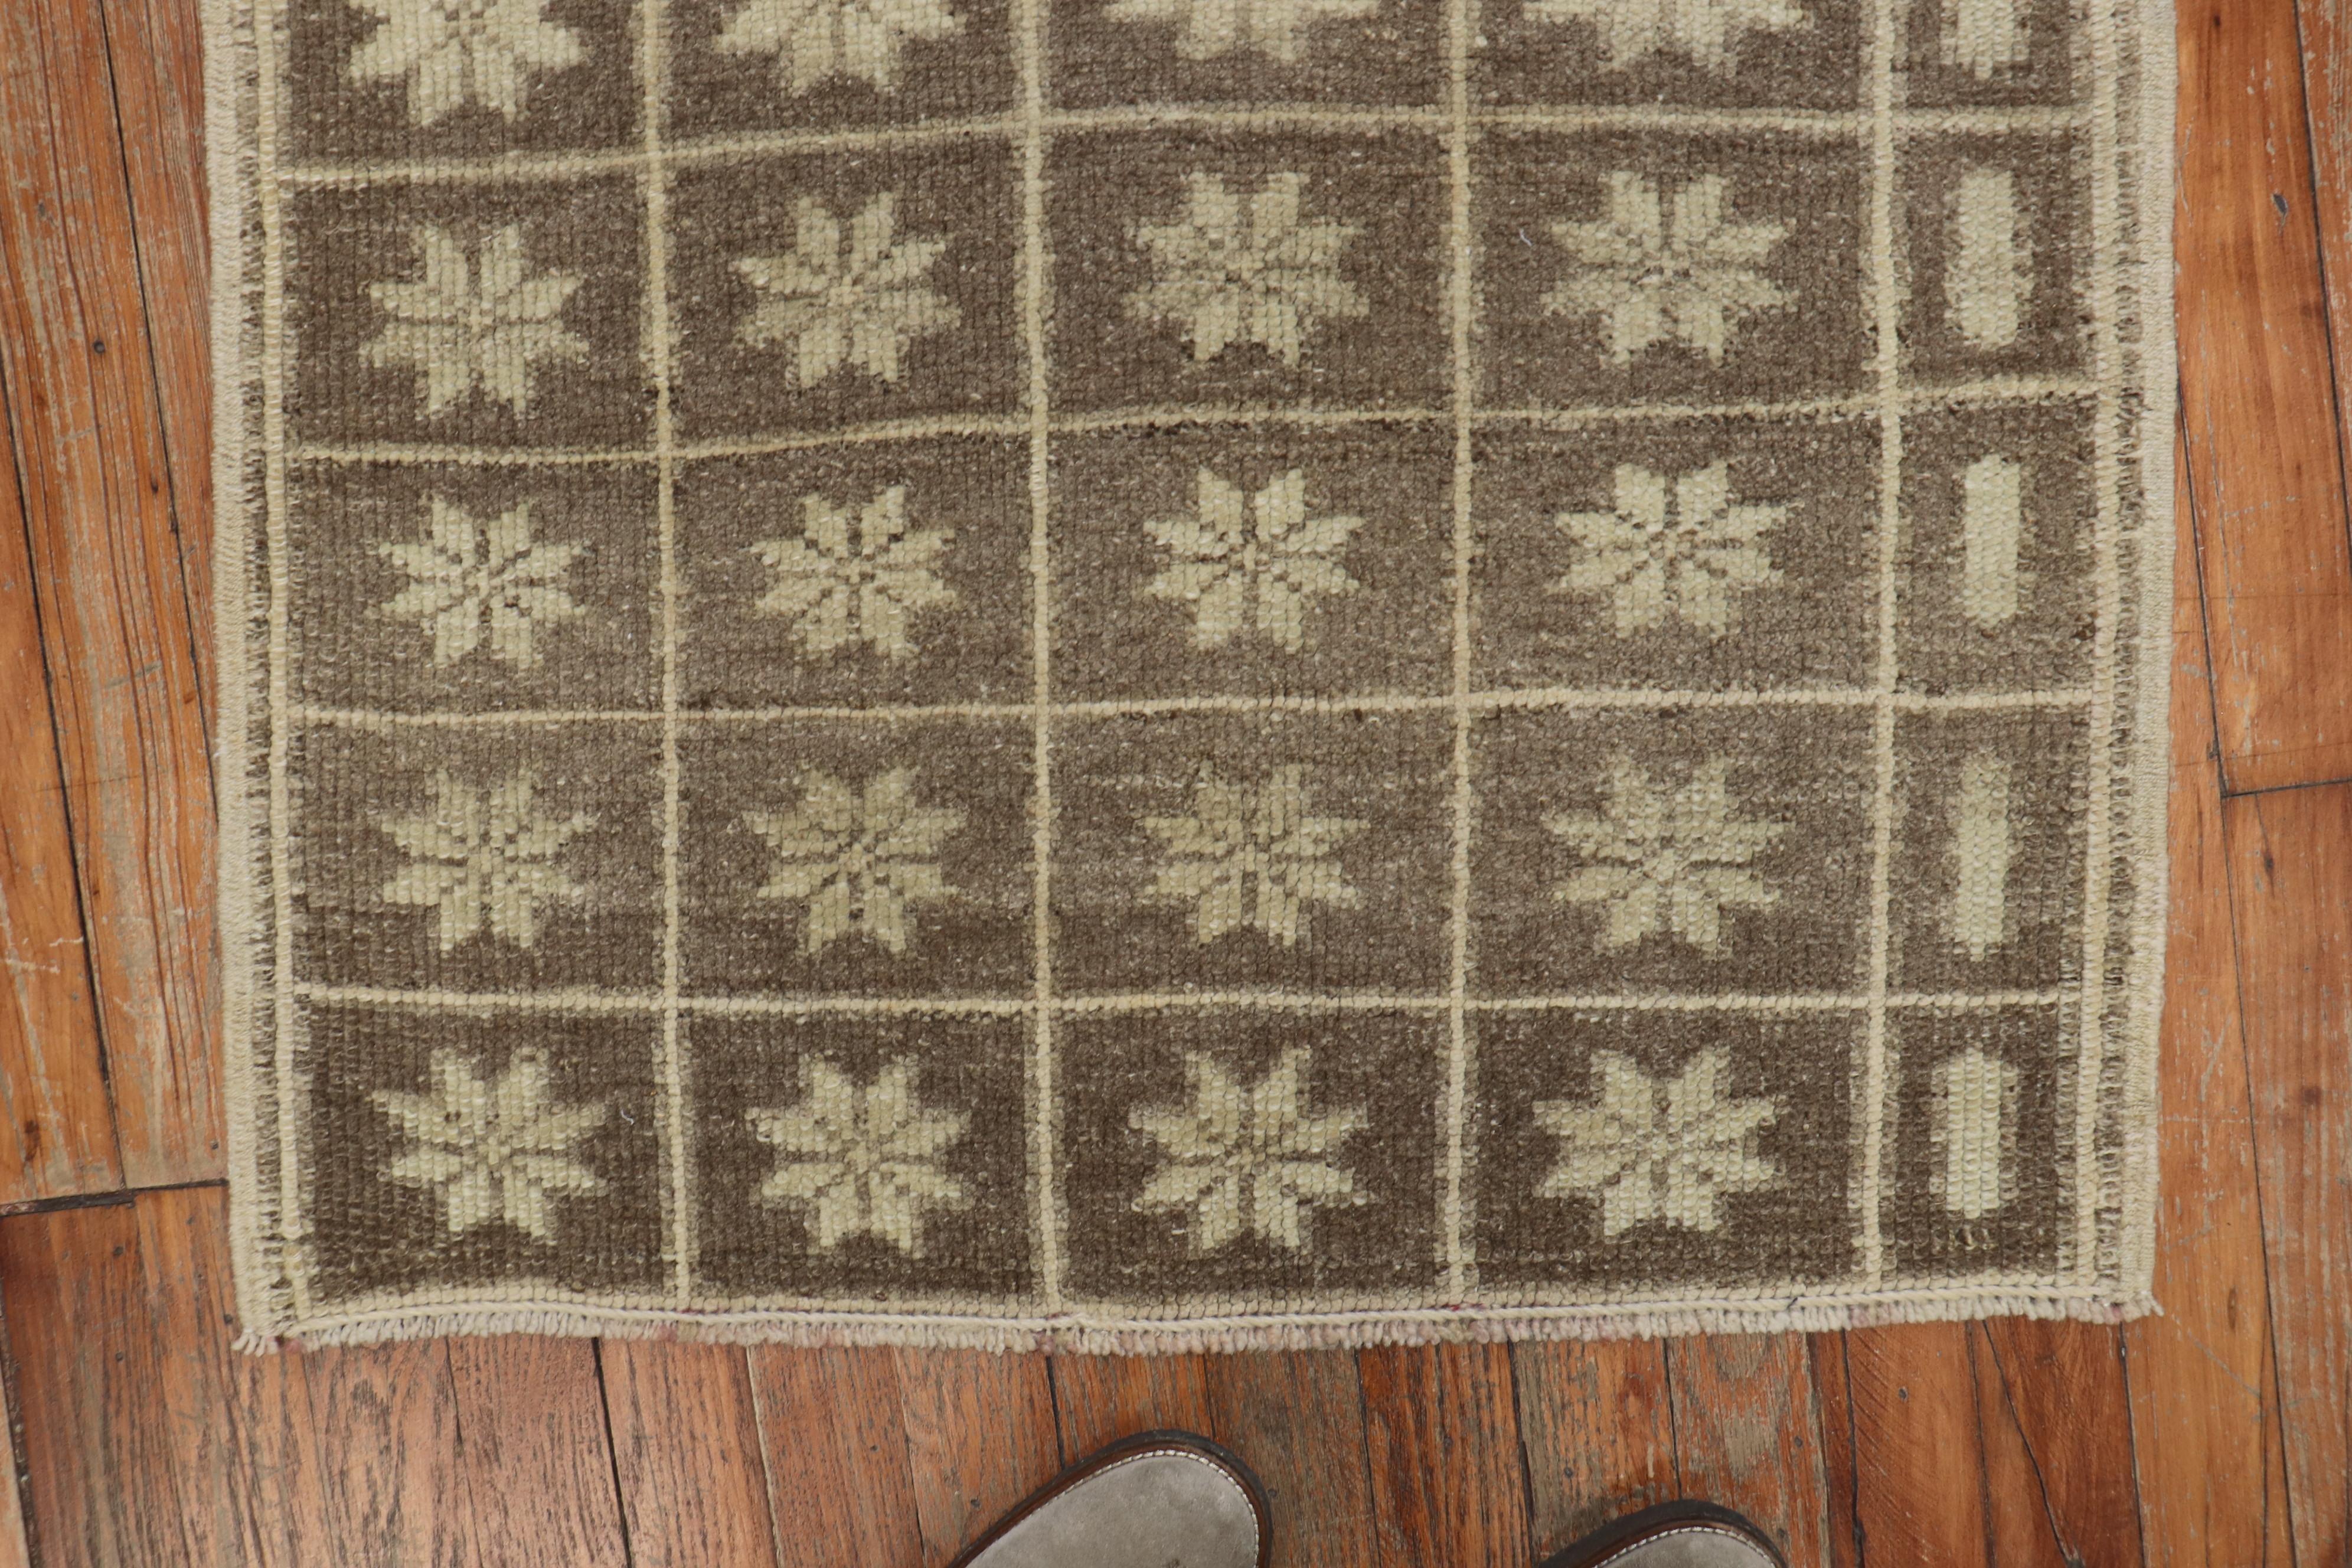 Mid-20th century Turkish fragment rug in neutral colors, predominantly in brown.

Measures: 2'5